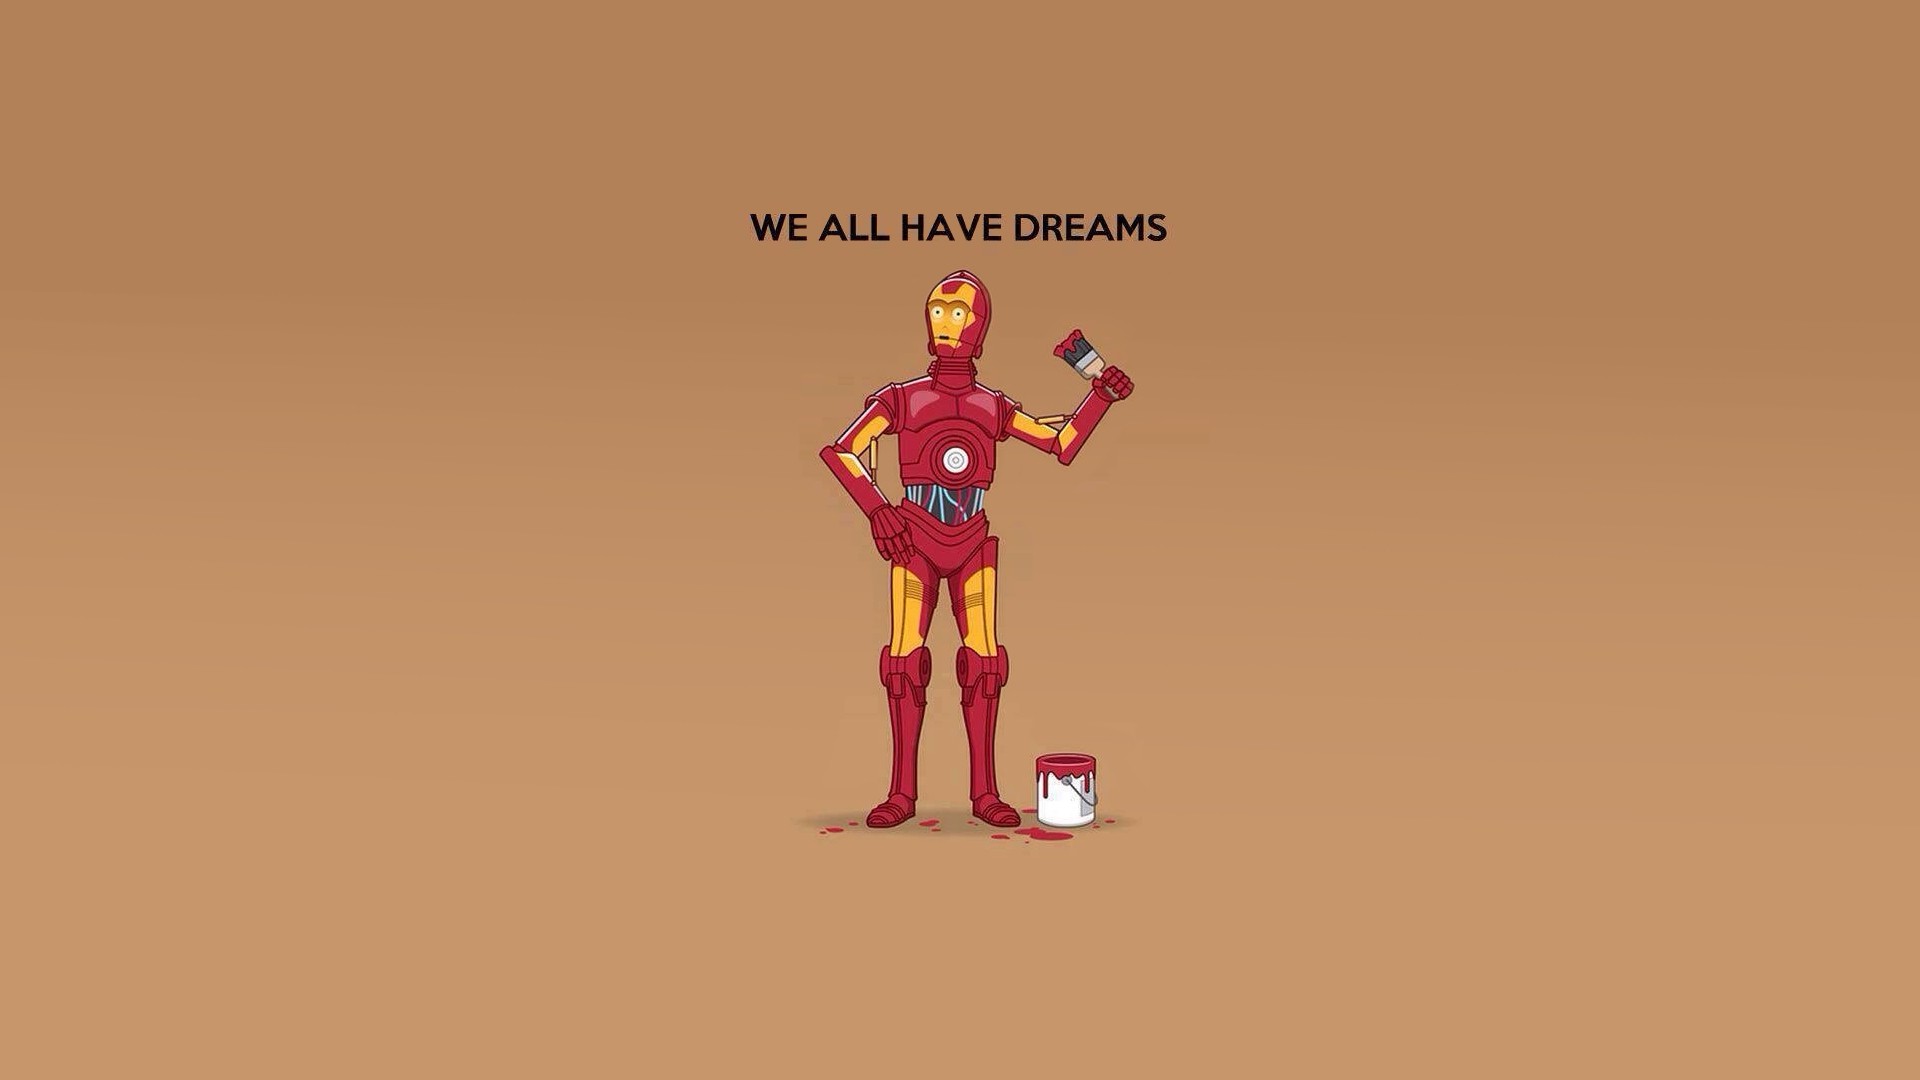 General 1920x1080 humor Star Wars C-3PO Iron Man Star Wars Droids Star Wars Humor beige background simple background paint brushes artwork science fiction